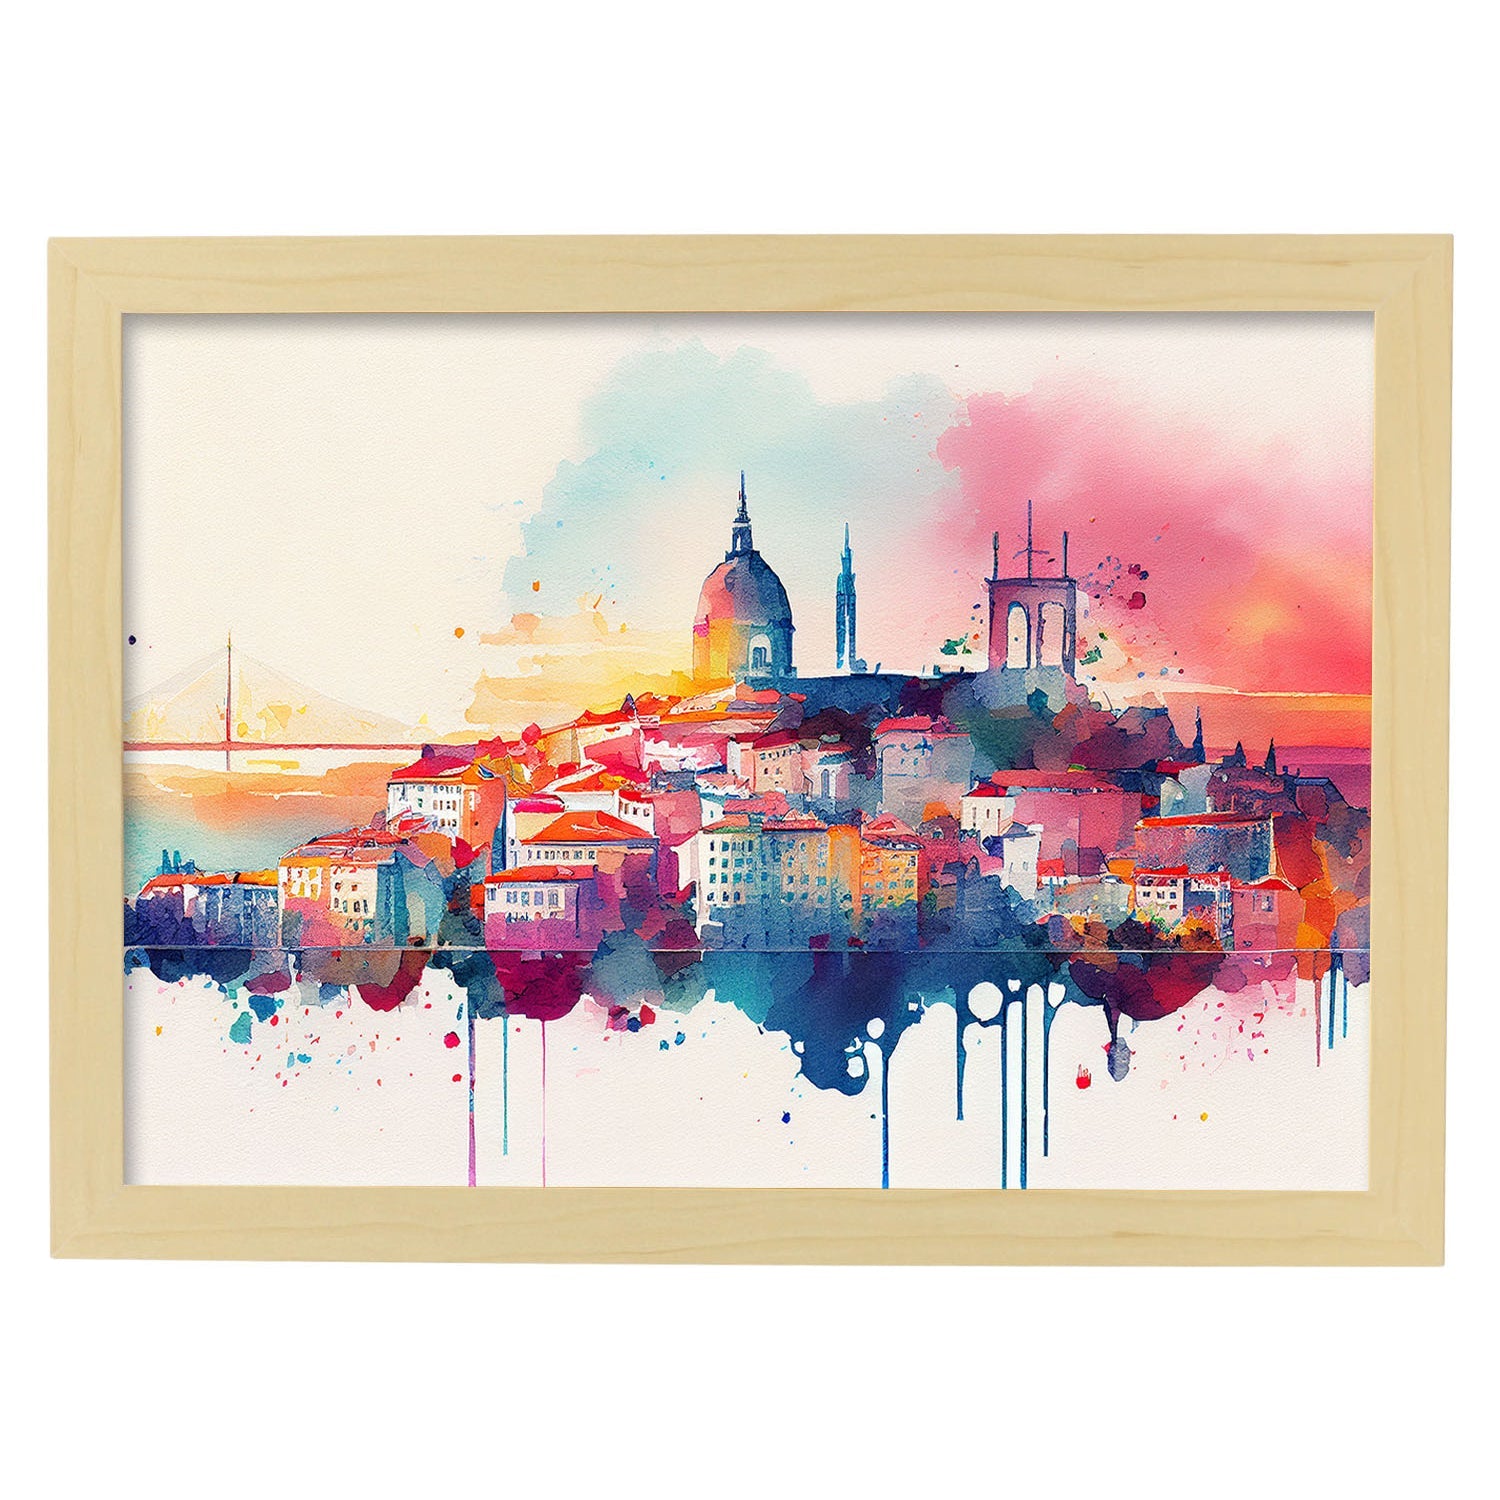 Nacnic watercolor of a skyline of the city of Lisbon_2. Aesthetic Wall Art Prints for Bedroom or Living Room Design.-Artwork-Nacnic-A4-Marco Madera Clara-Nacnic Estudio SL